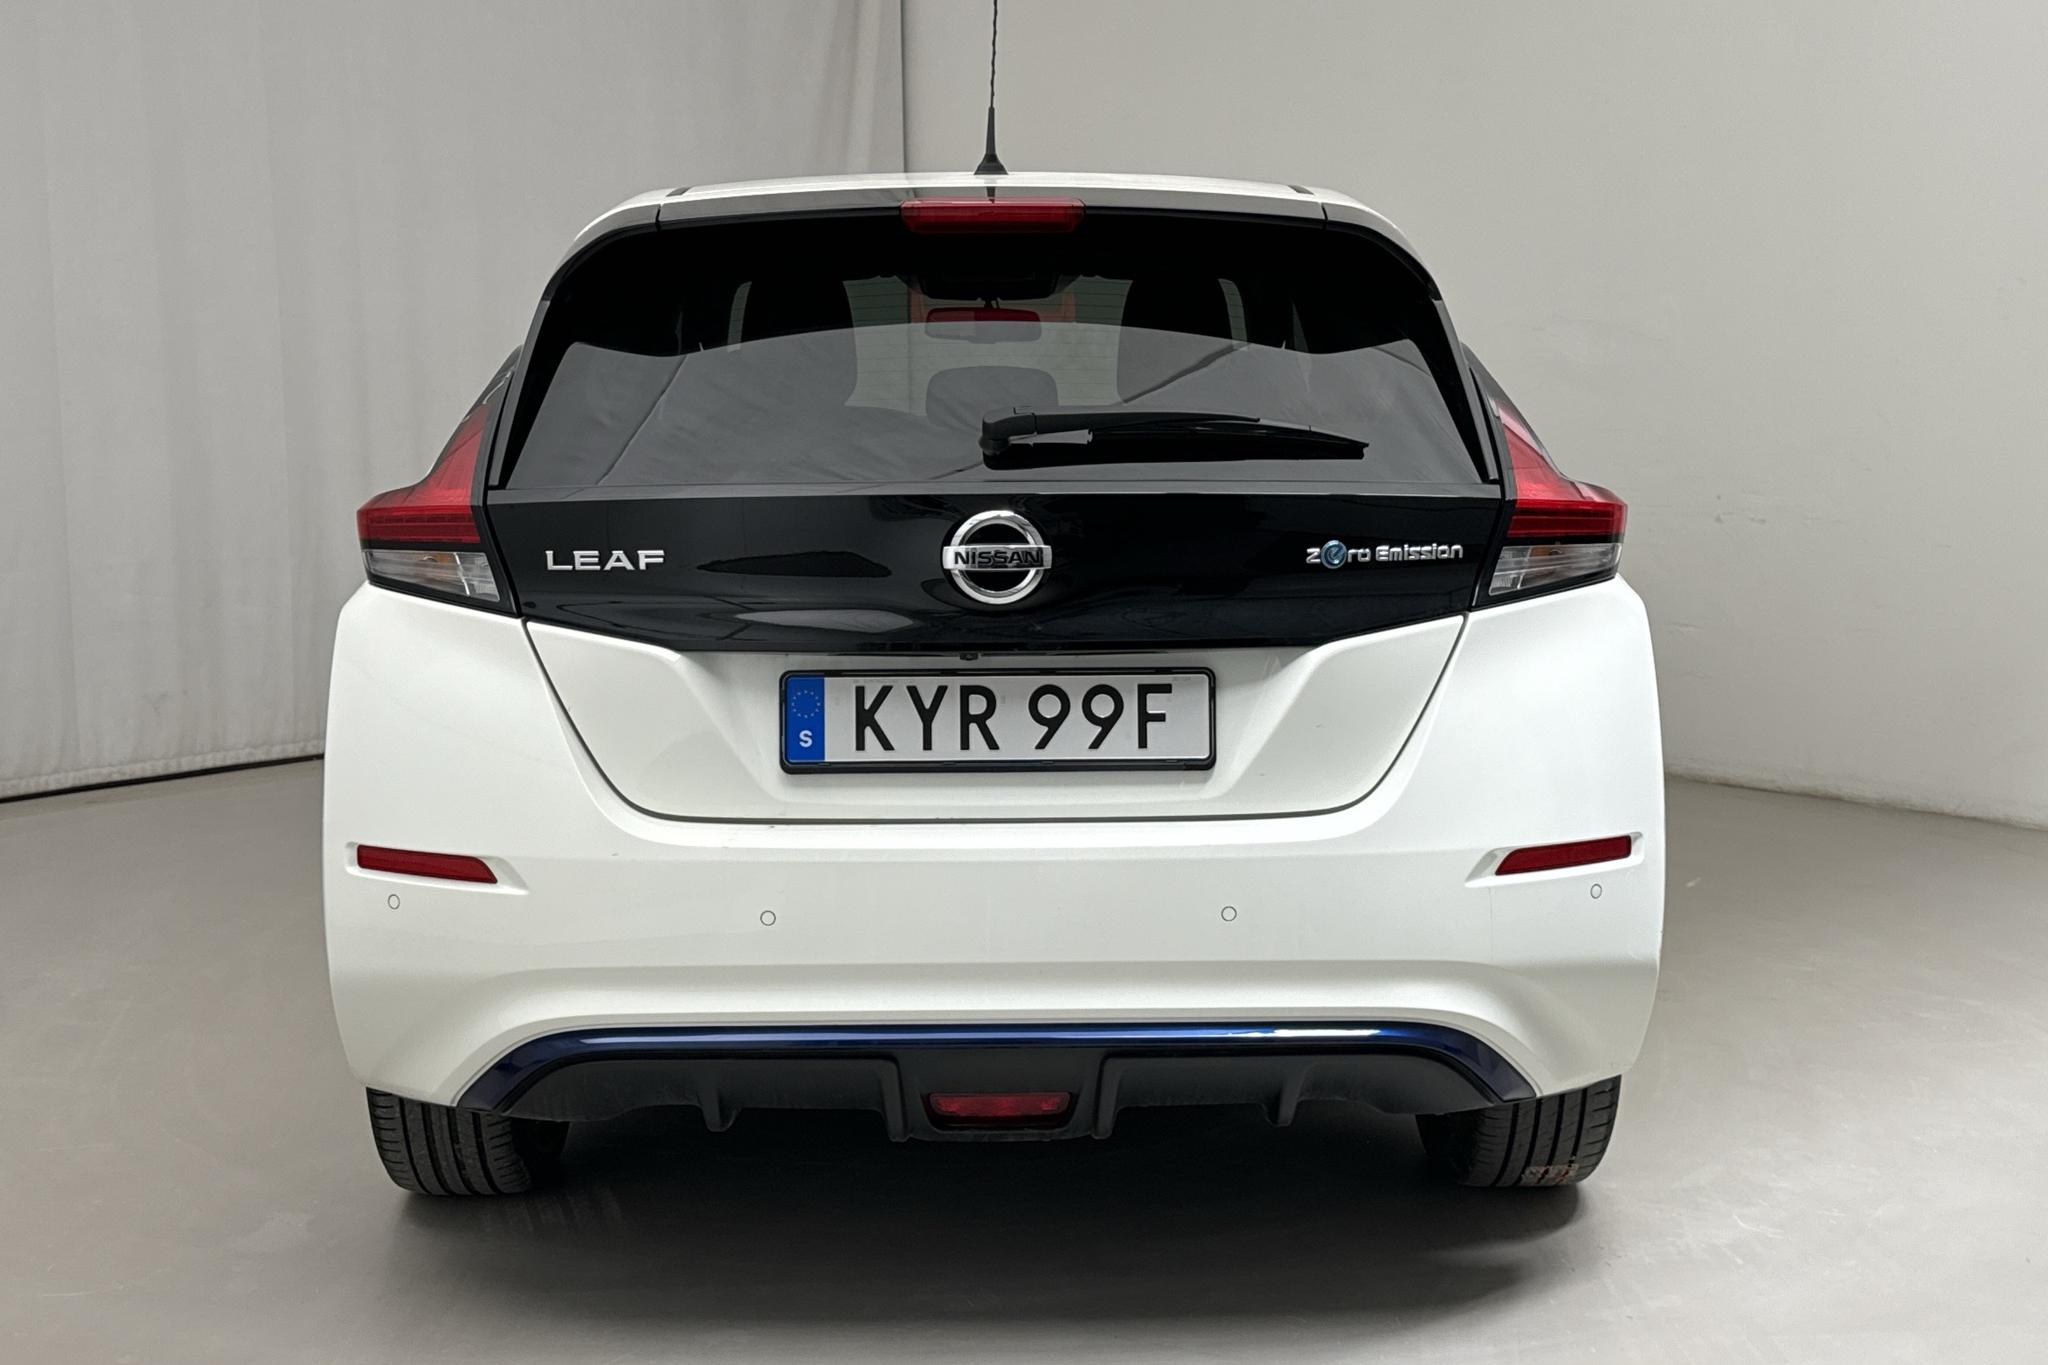 Nissan LEAF 5dr 39 kWh (150hk) - 46 770 km - Automatic - white - 2021